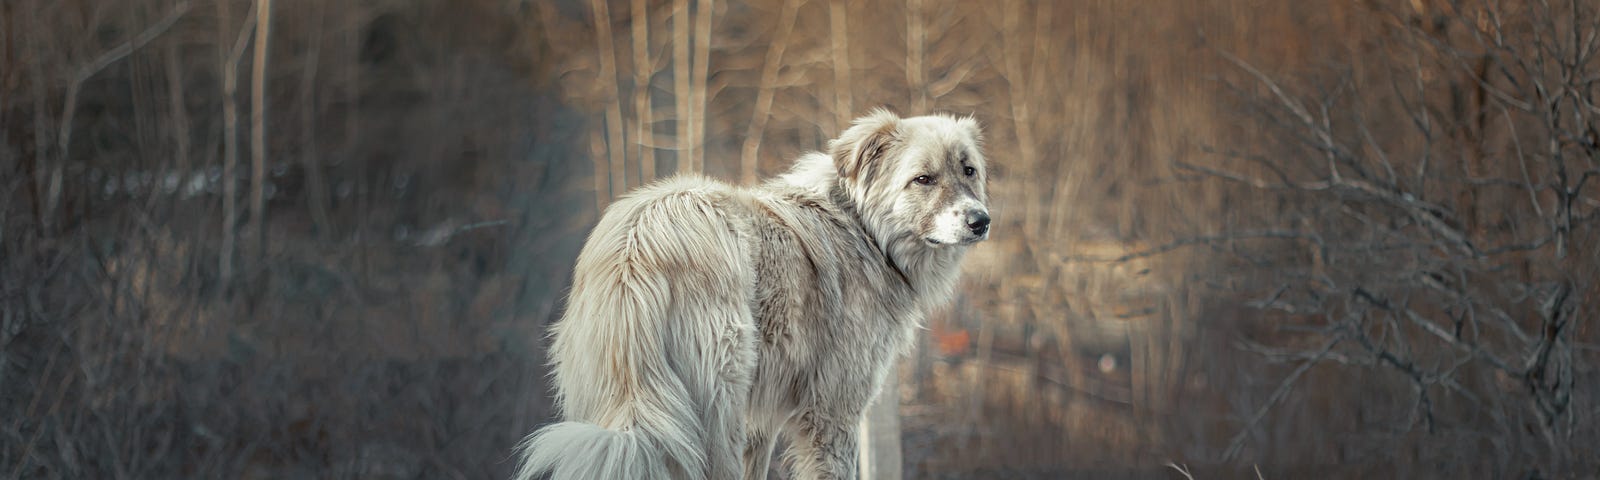 An image of a sad dog — maybe it feels how life has fallen apart?